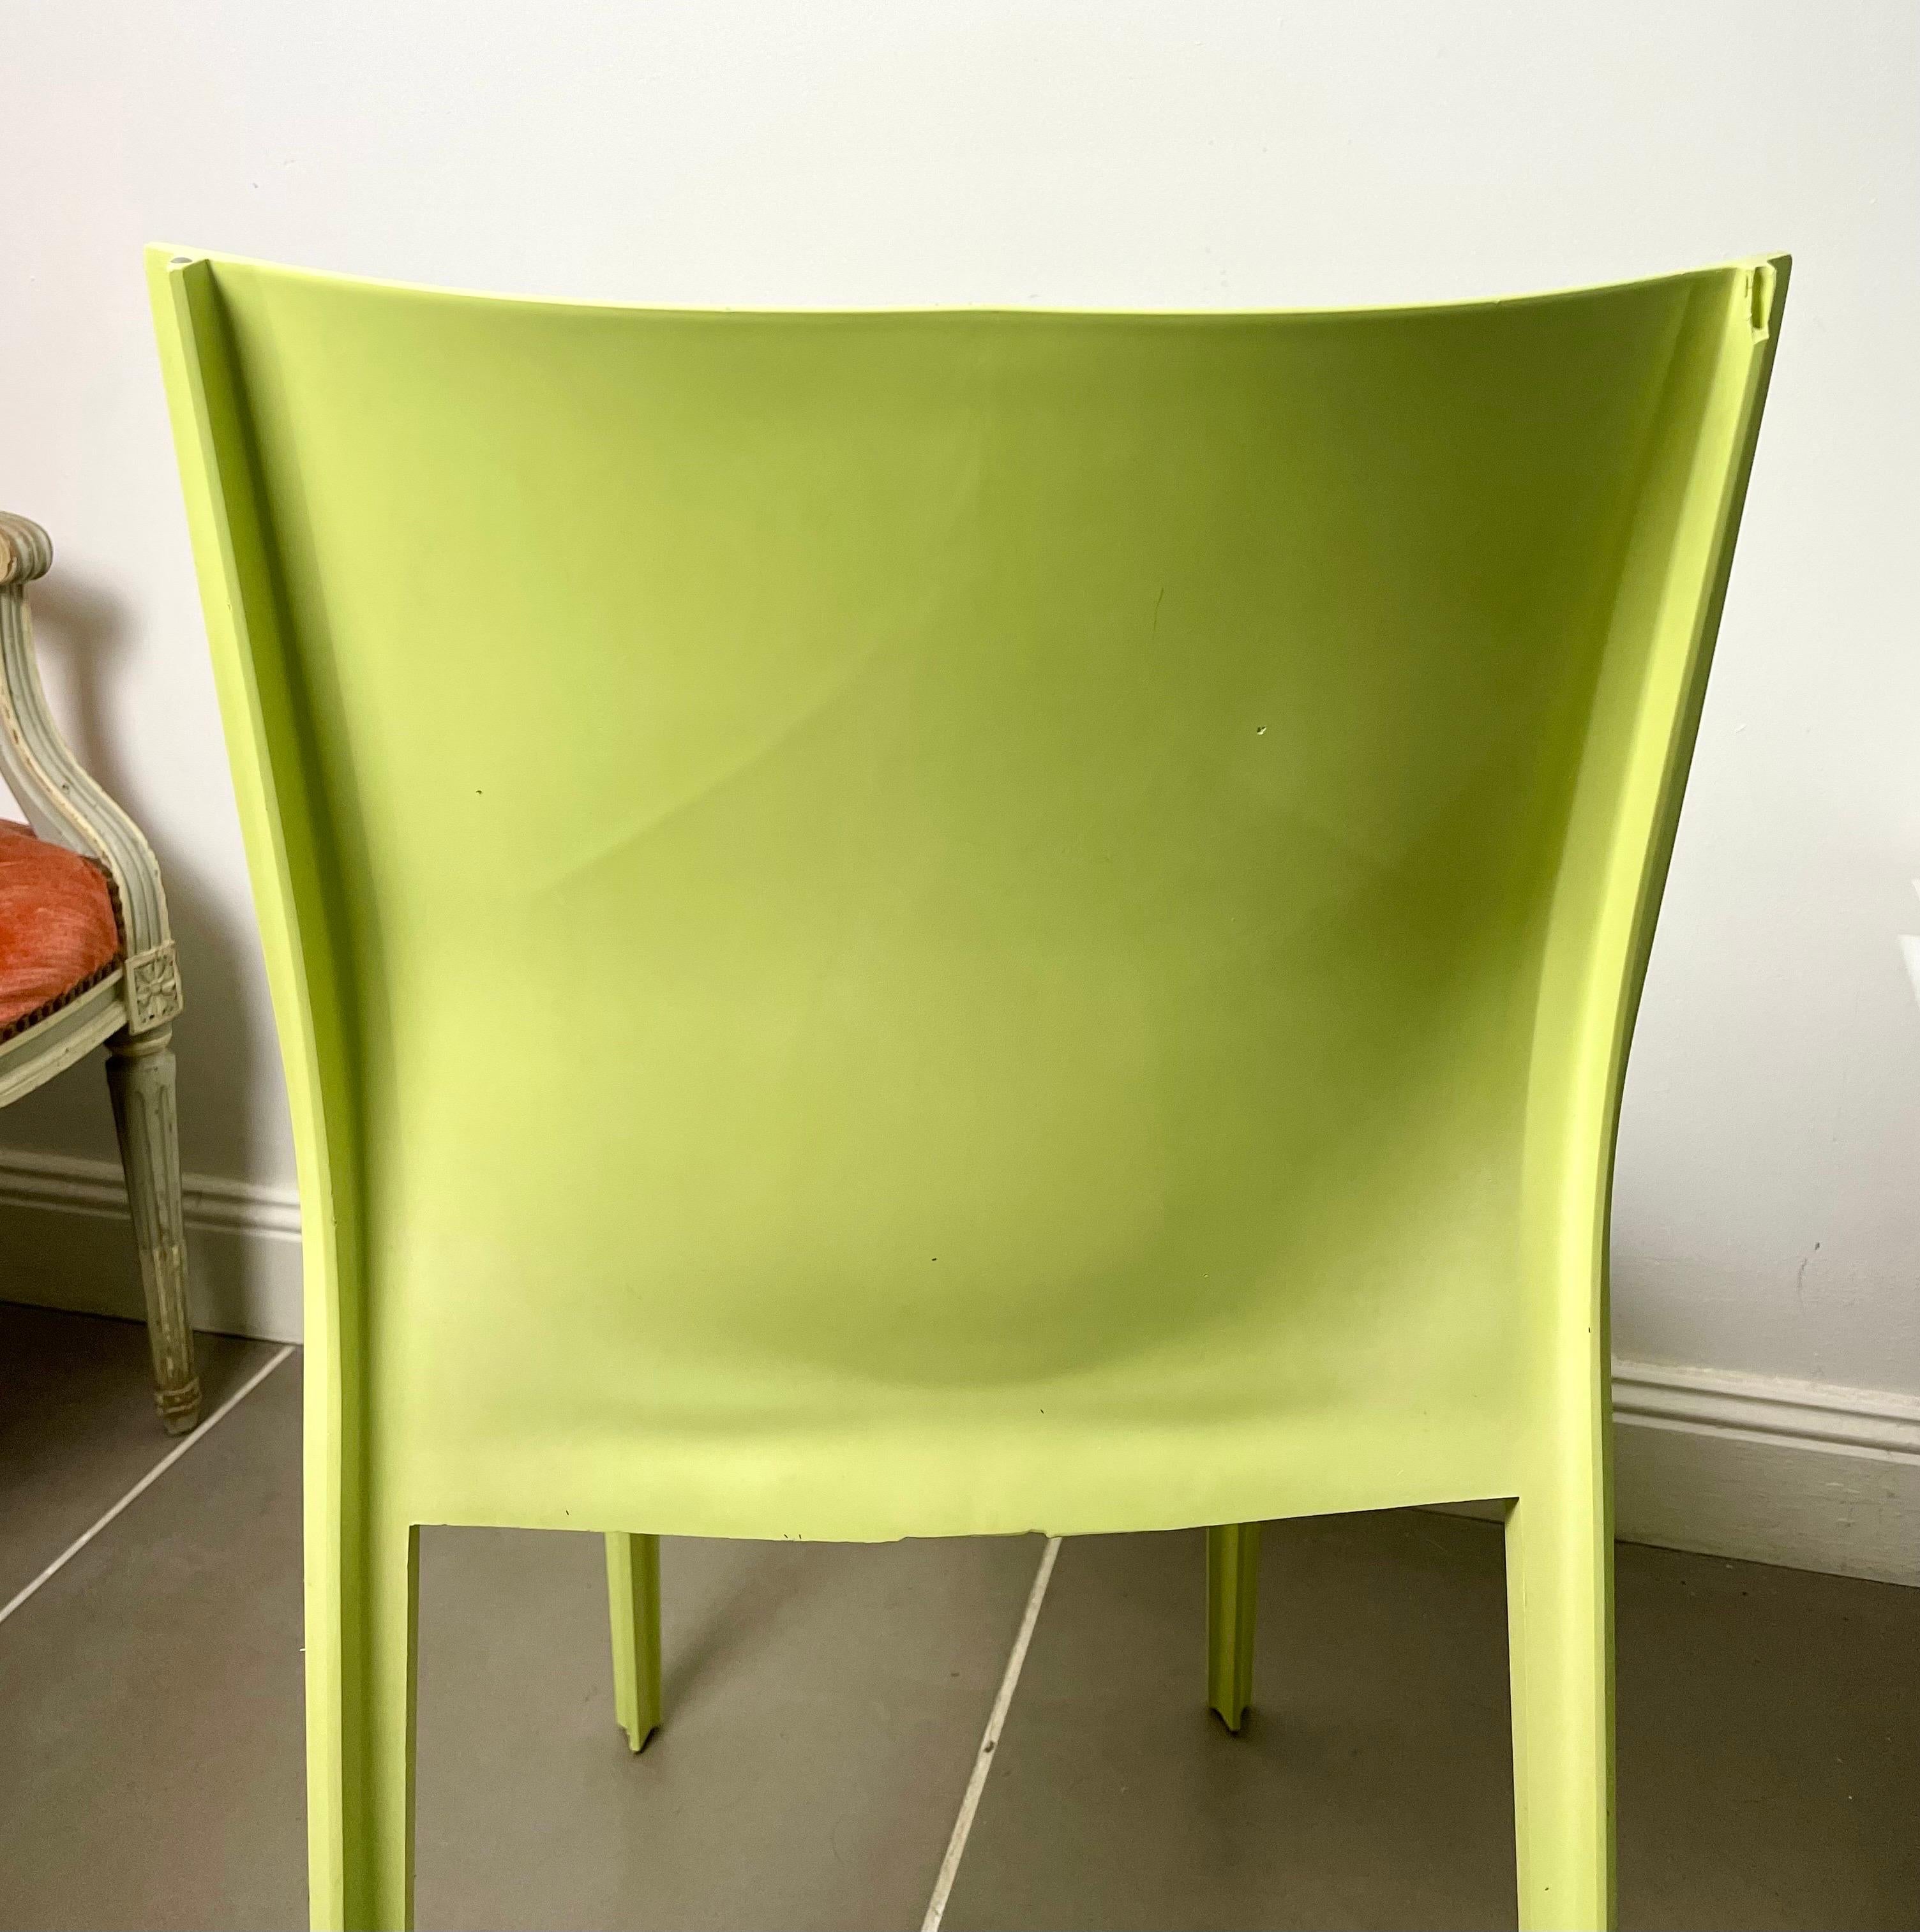 Philippe Starck, Set of 2 French Green Chairs, Design Slick Slick XO - France For Sale 5